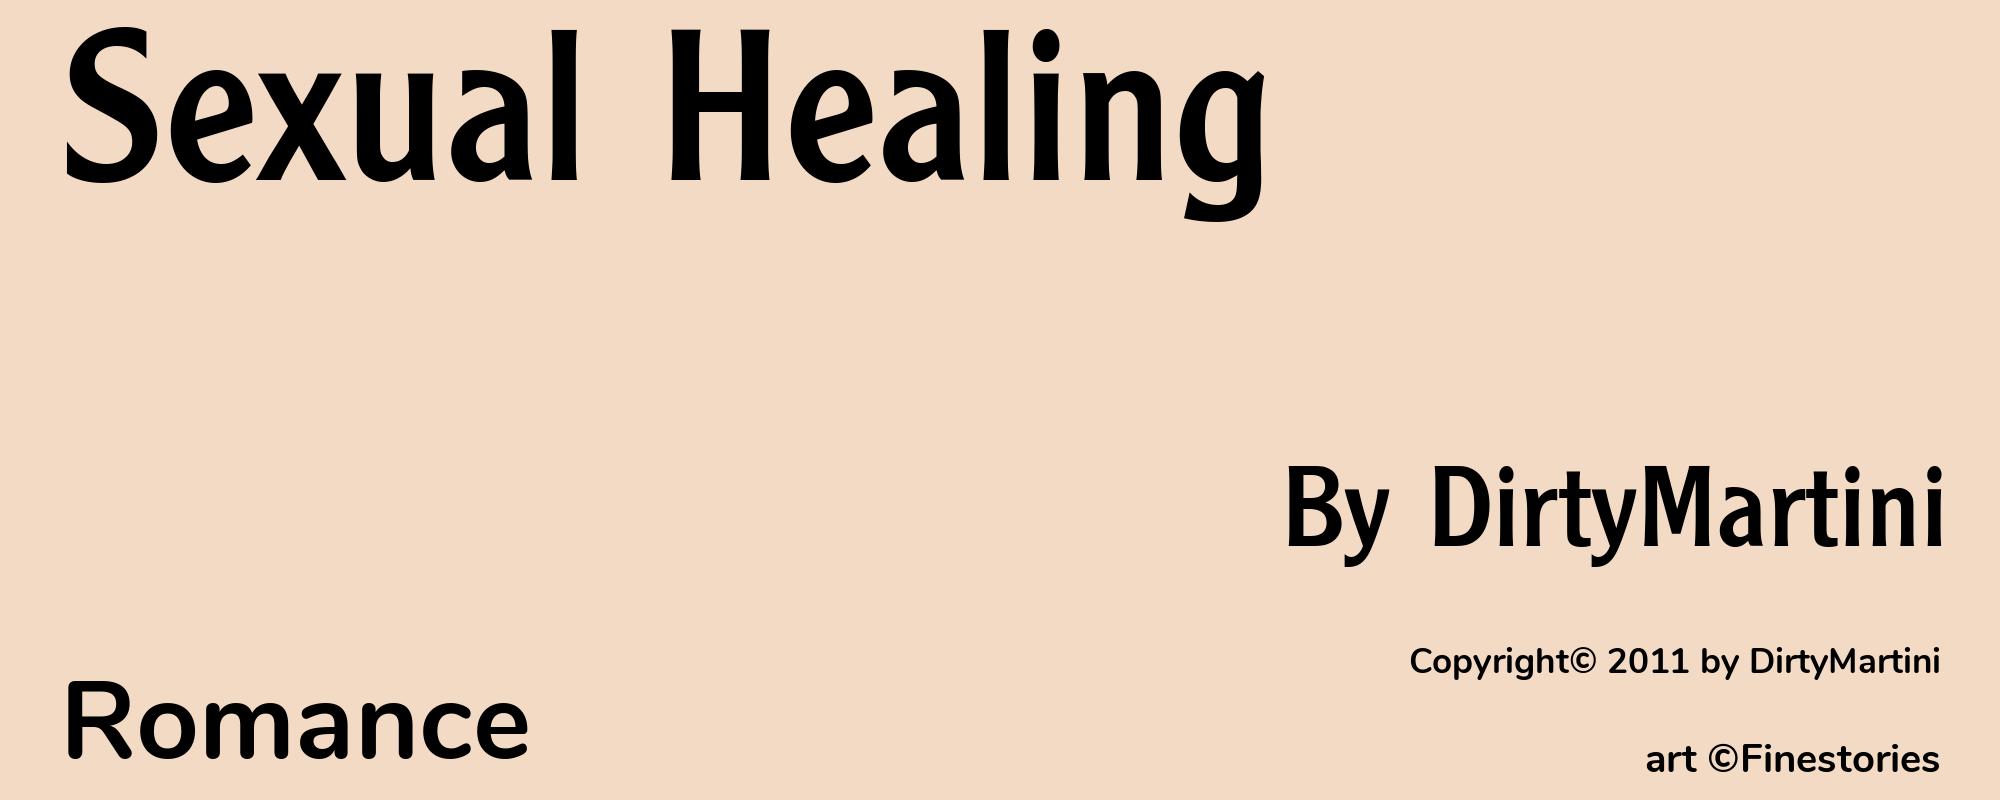 Sexual Healing - Cover